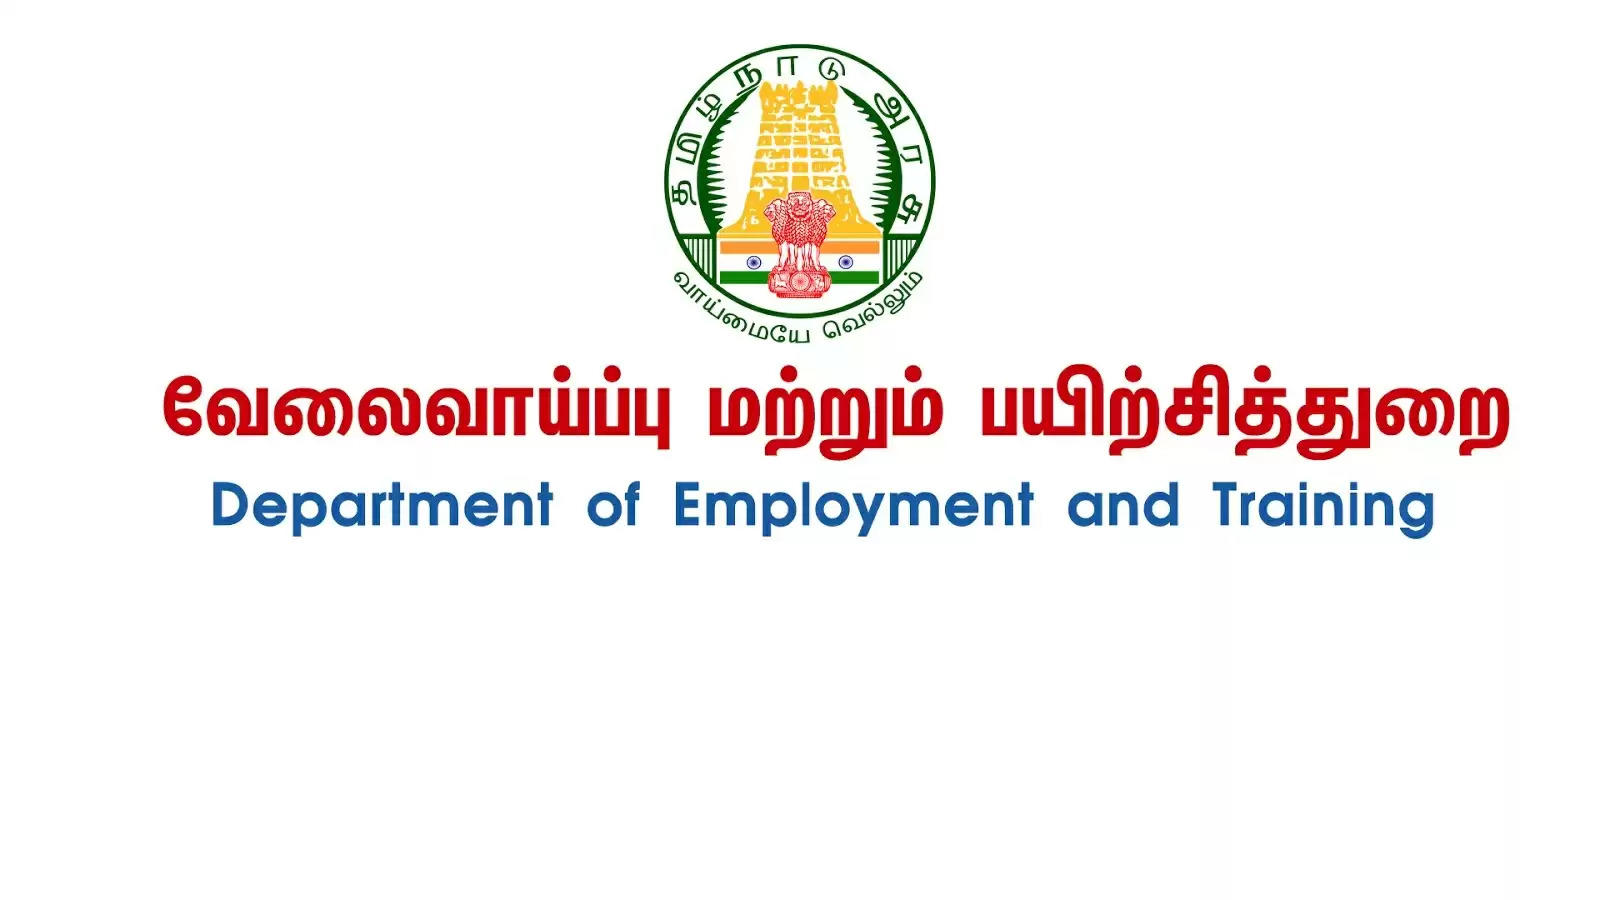 Department of Employment and Training